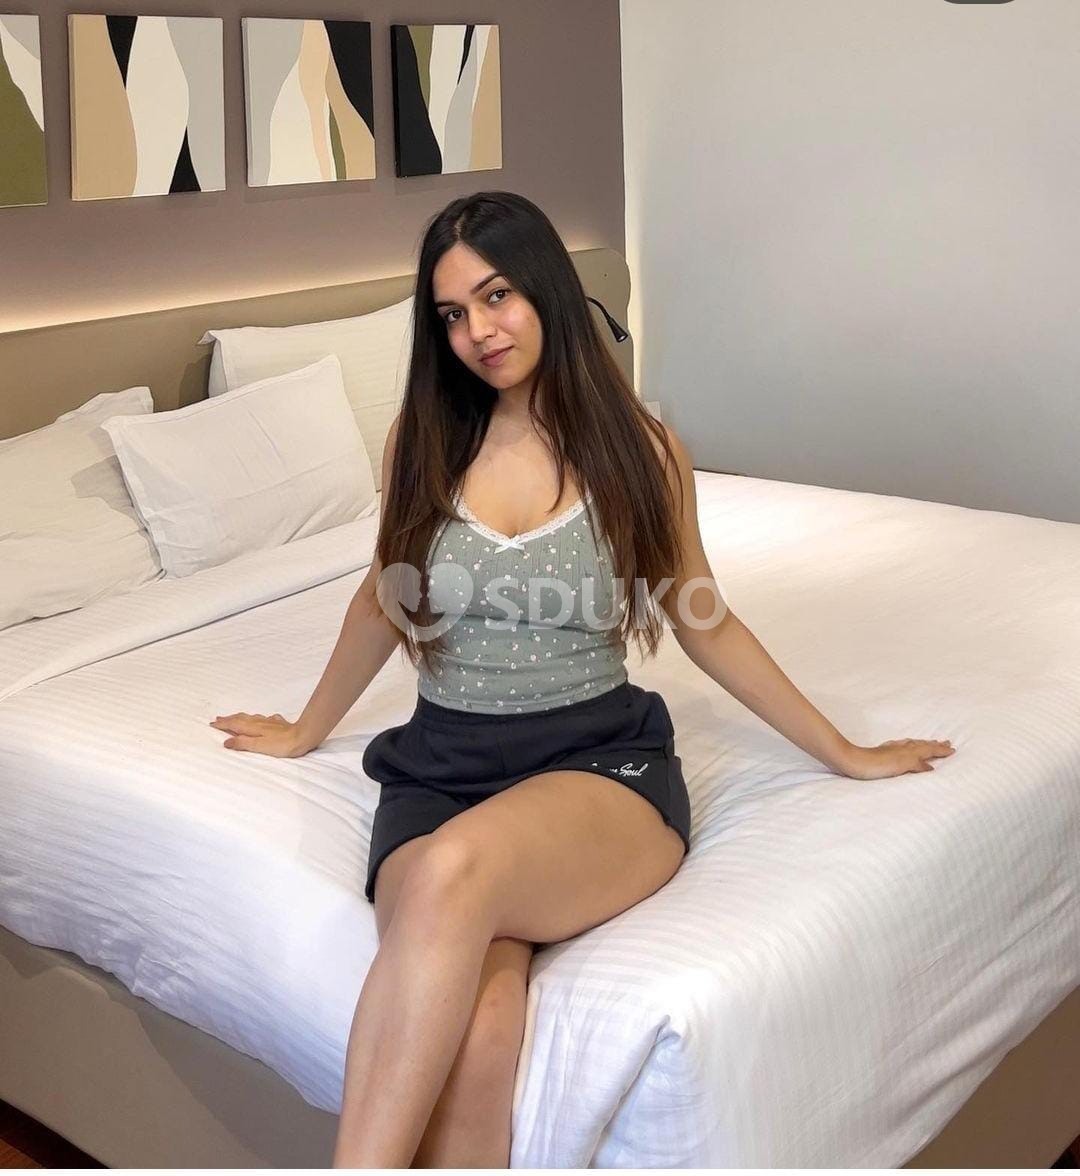 NASHIK IO LOW PRICE CALL GIRLS AVAILABLE HOT SEXY INDEPENDENTMODEL AVAILABLE CONTACT NOW